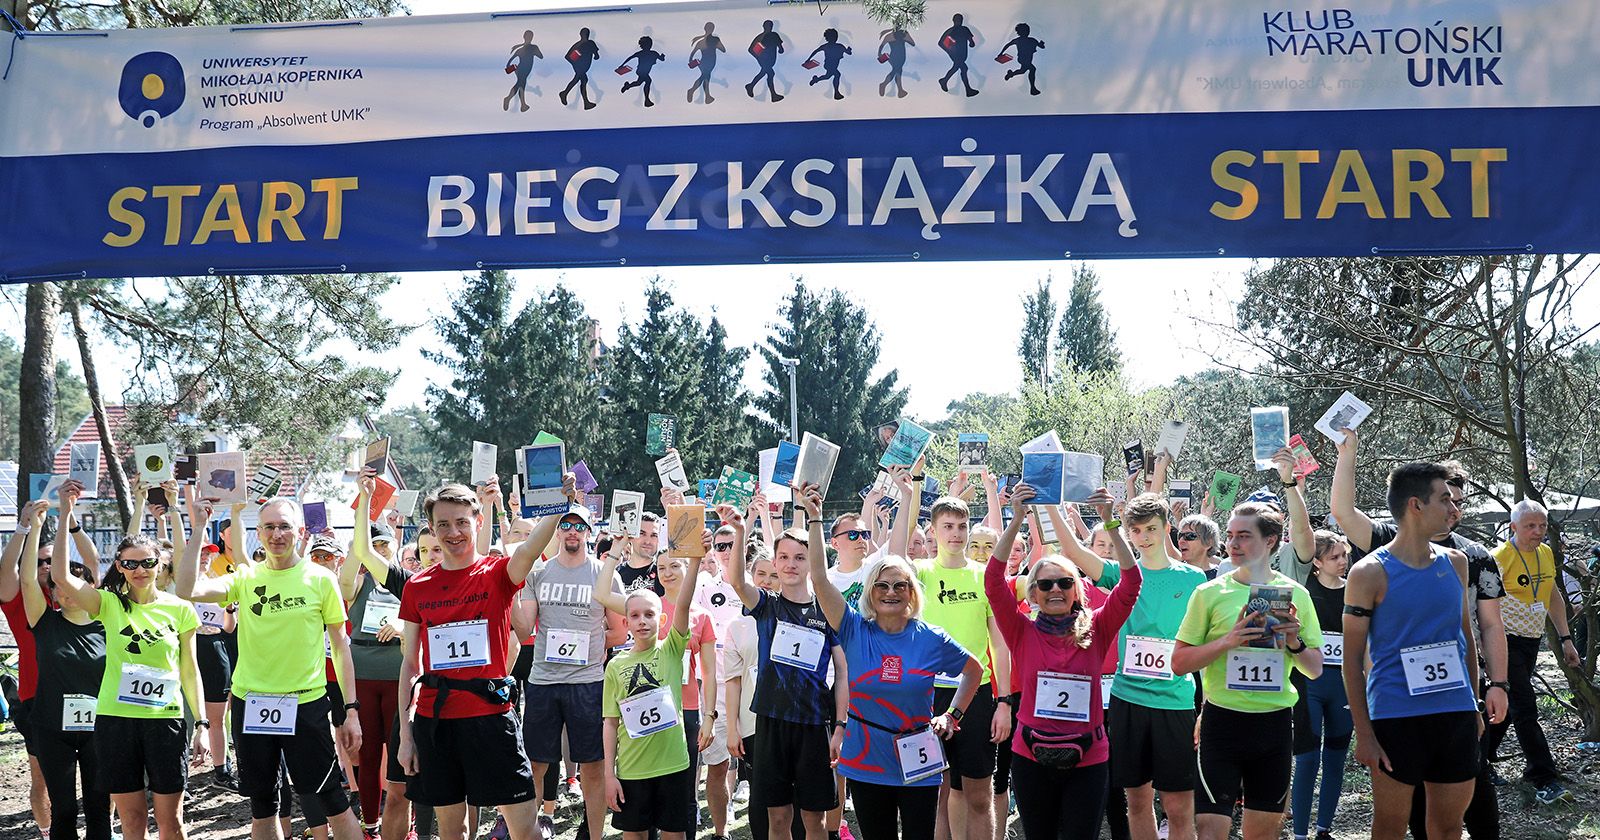 The Run with the Book is for amateurs and prizes will be provided not only for the fastest runners People on the beginning of run, all of them show their books